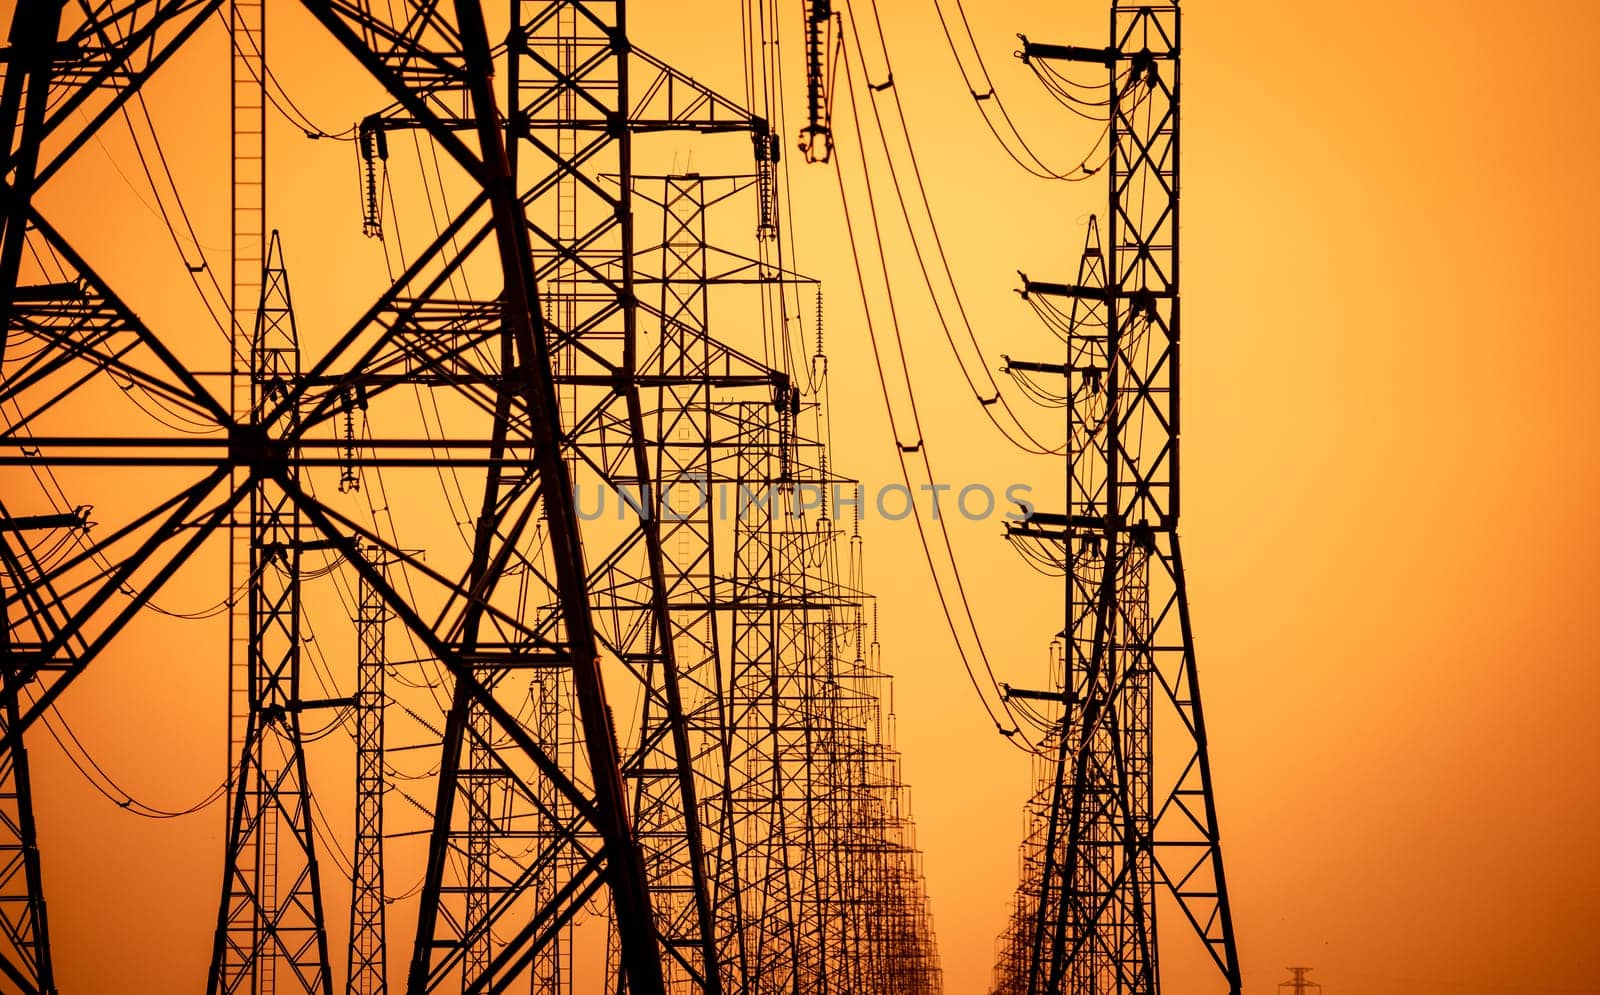 High voltage electric transmission tower. High voltage power lines on electric pylon against a sunset sky. Electrical infrastructure. Energy crisis. Electric power distribution. Energy distribution.